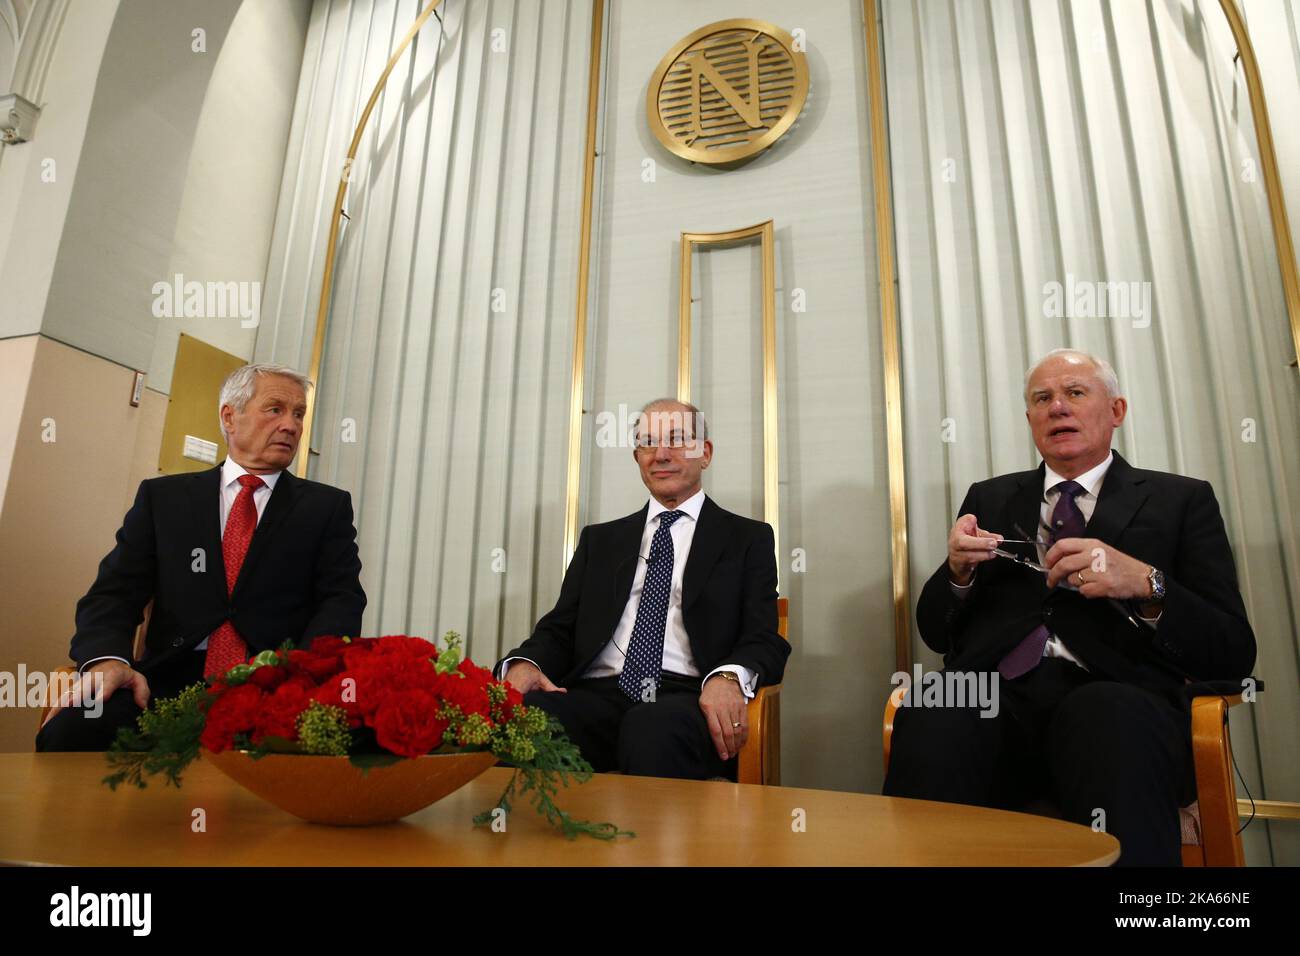 Oslo, 20131209: Ahmet Üzümcü (center), director general of OPCW, addresses a press conference at the Nobel Institute, where OPCW (Organization for the Prohibition of Chemical Weapons)  are to receive the 2013 Peace Nobel Prize attributed for its extensive efforts to eliminate chemical weapons.  Left is Chairman of the Norwegian Nobel Committee Thorbjorn Jagland, and right is Geir Lundestad, head of the Norwegian Nobel Institute.  Photo: Heiko Junge  Stock Photo